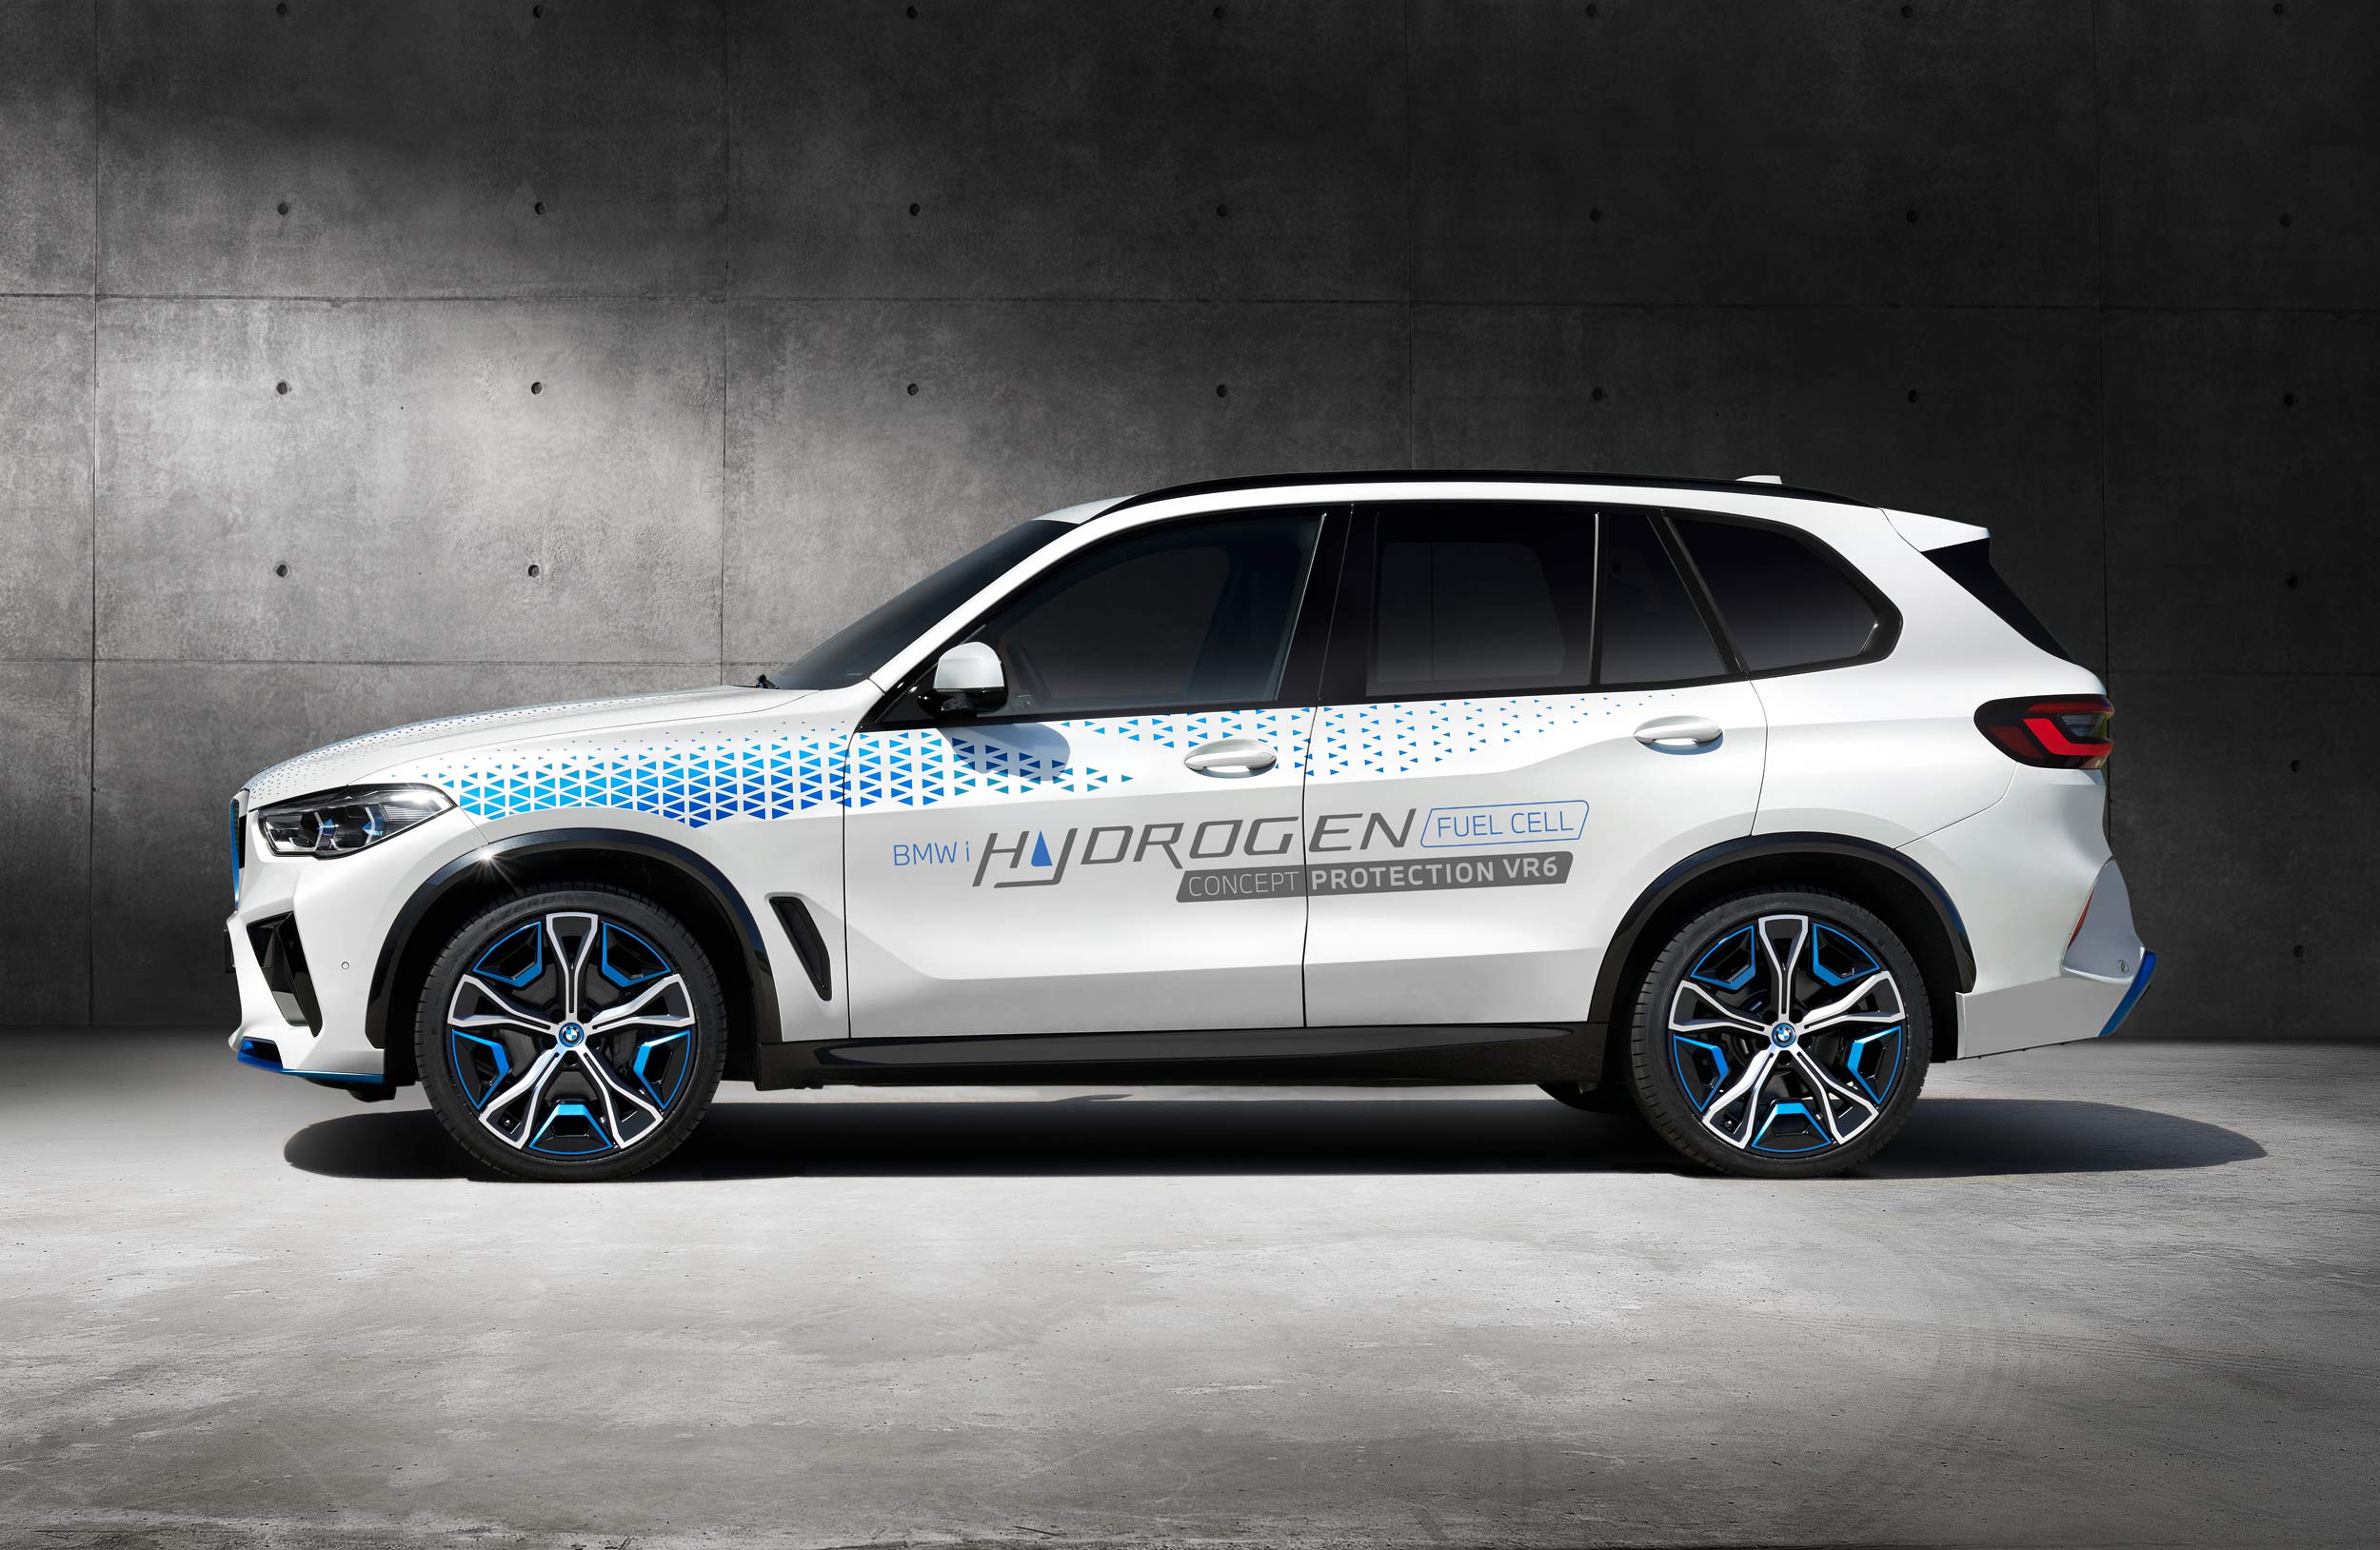 BMWX5Hydrogen_02_Protection_highres